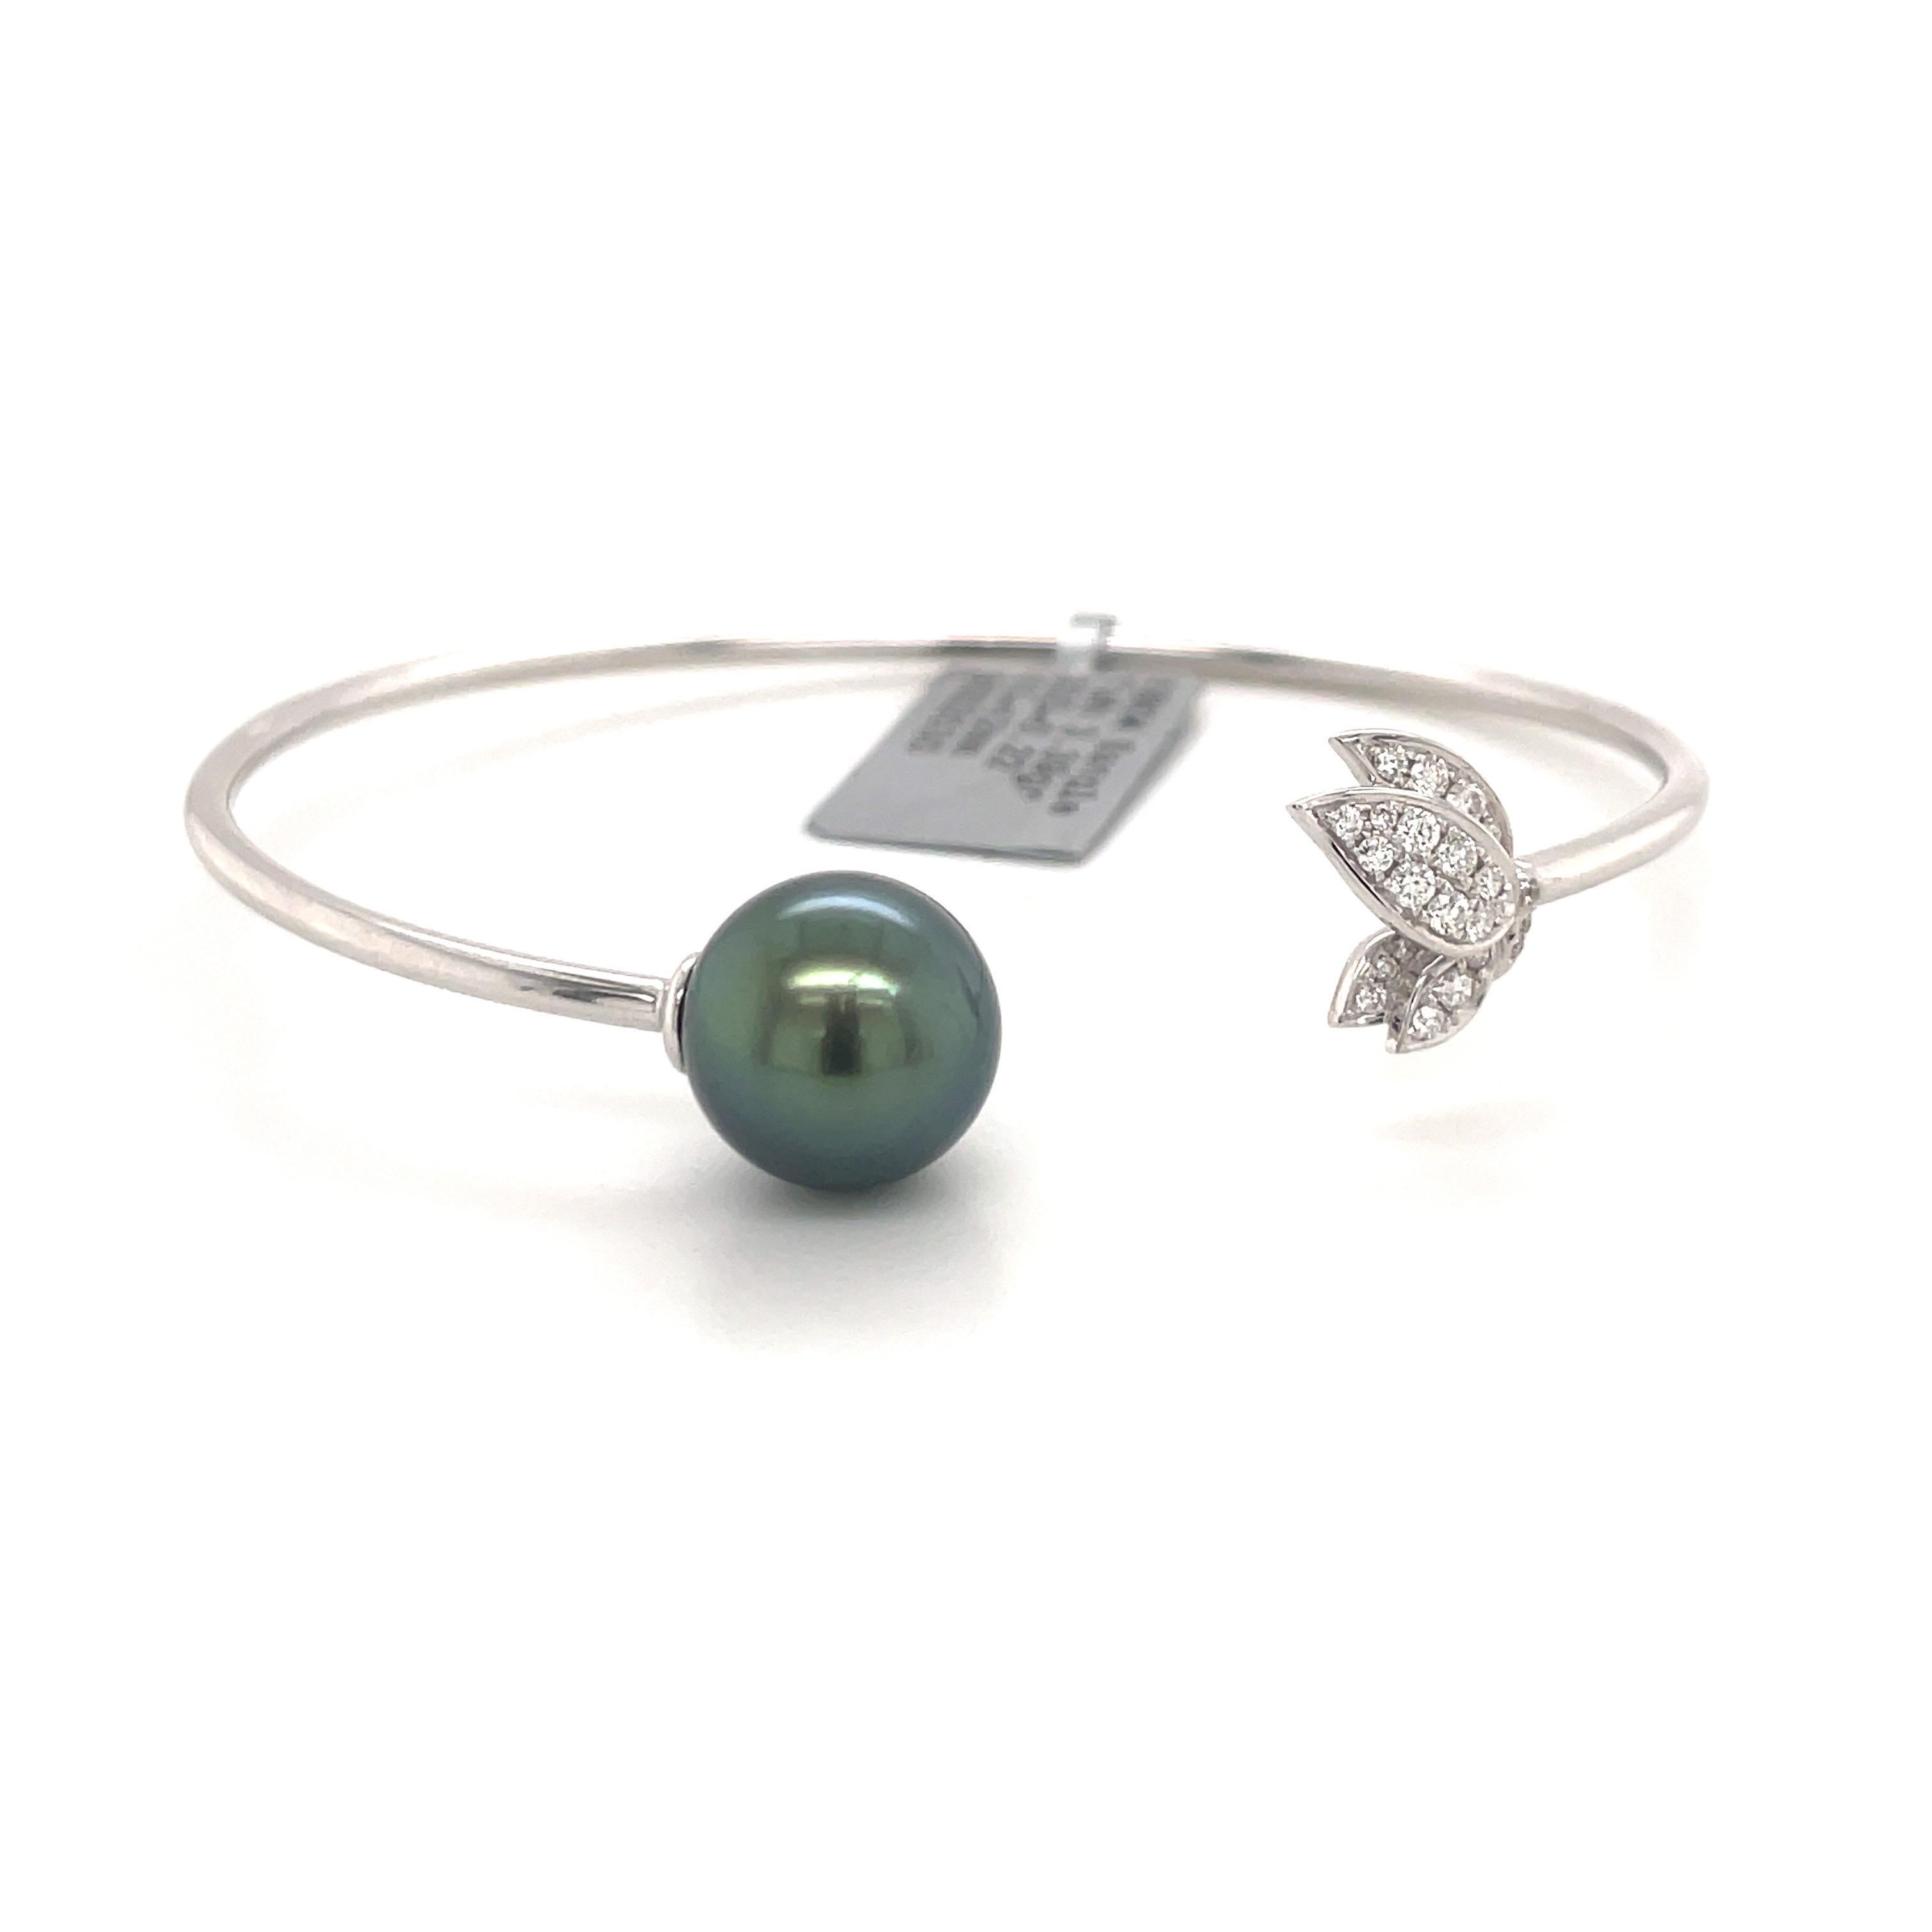 18 Karat White gold bangle bracelet featuring one Tahitian pearl measuring 11-12 MM with a diamond motif containing 23 round brilliants 0.22 carats.
Color G-H
Clarity SI

Pearl can be changed to South Seal or Freshwater.
DM for pricing. 